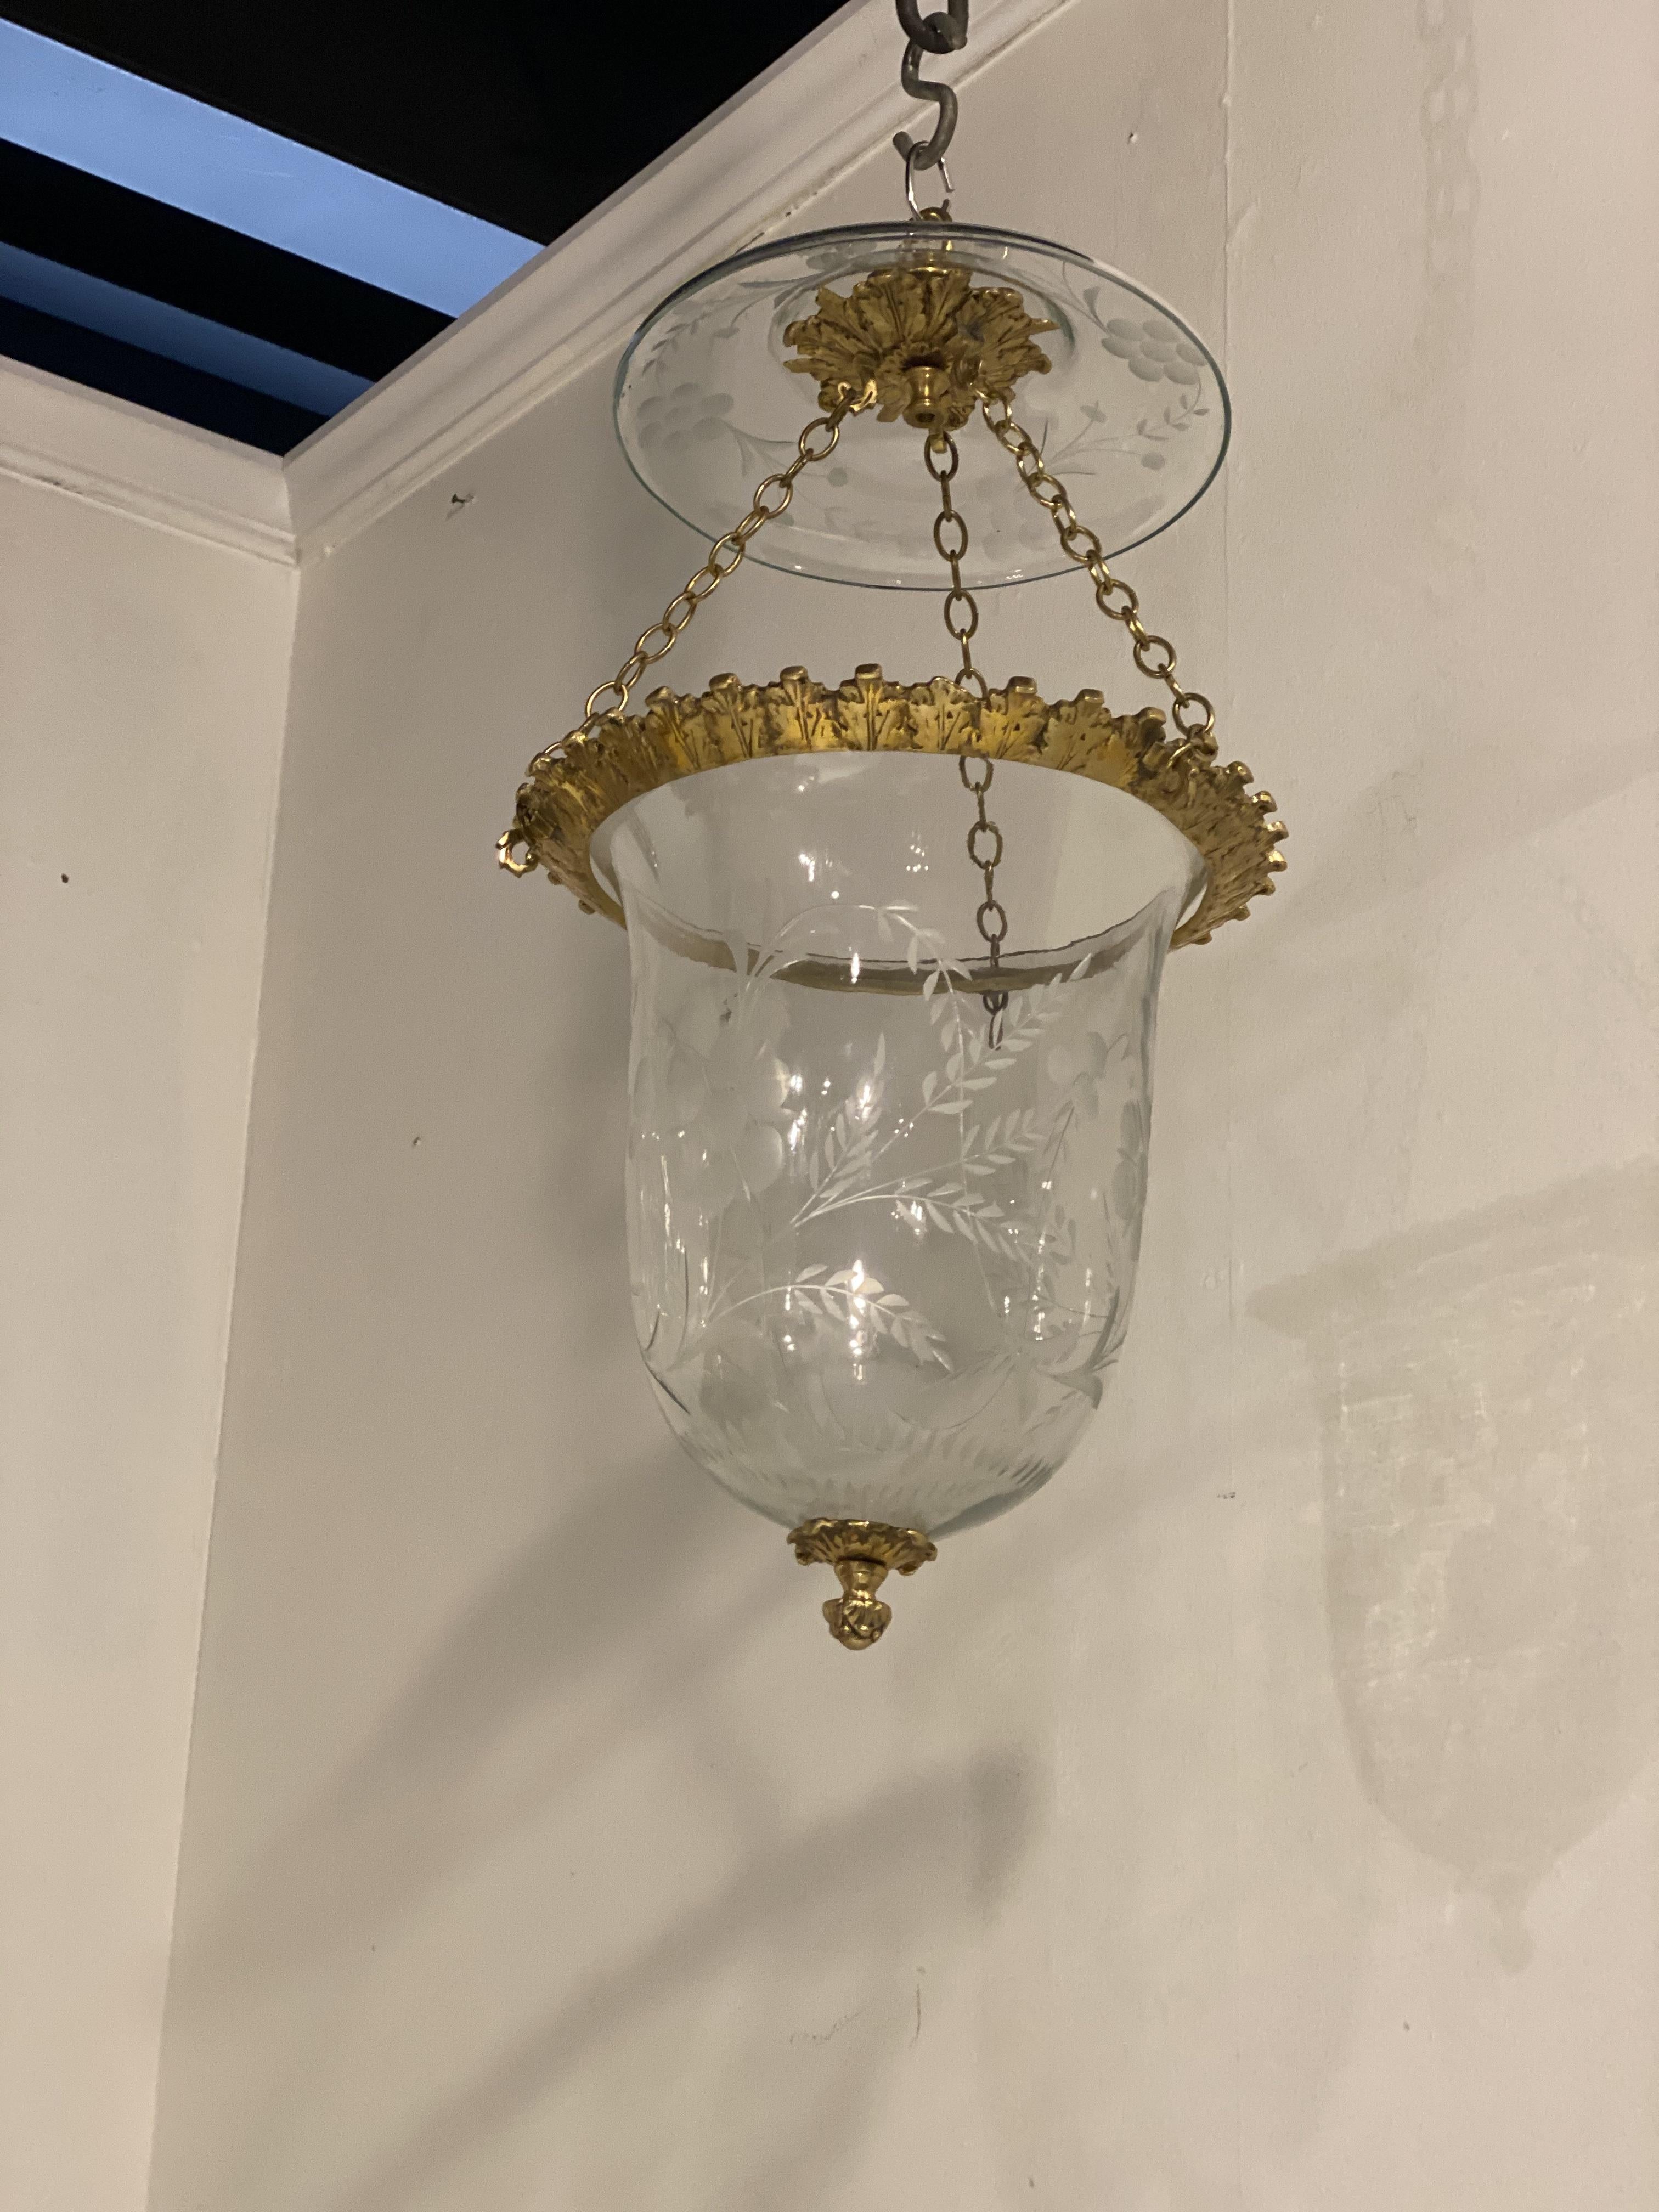 A circa 1930’s French etched glass lantern with bronze fittings. In very good vintage condition. 

Dealer: G302YP 
